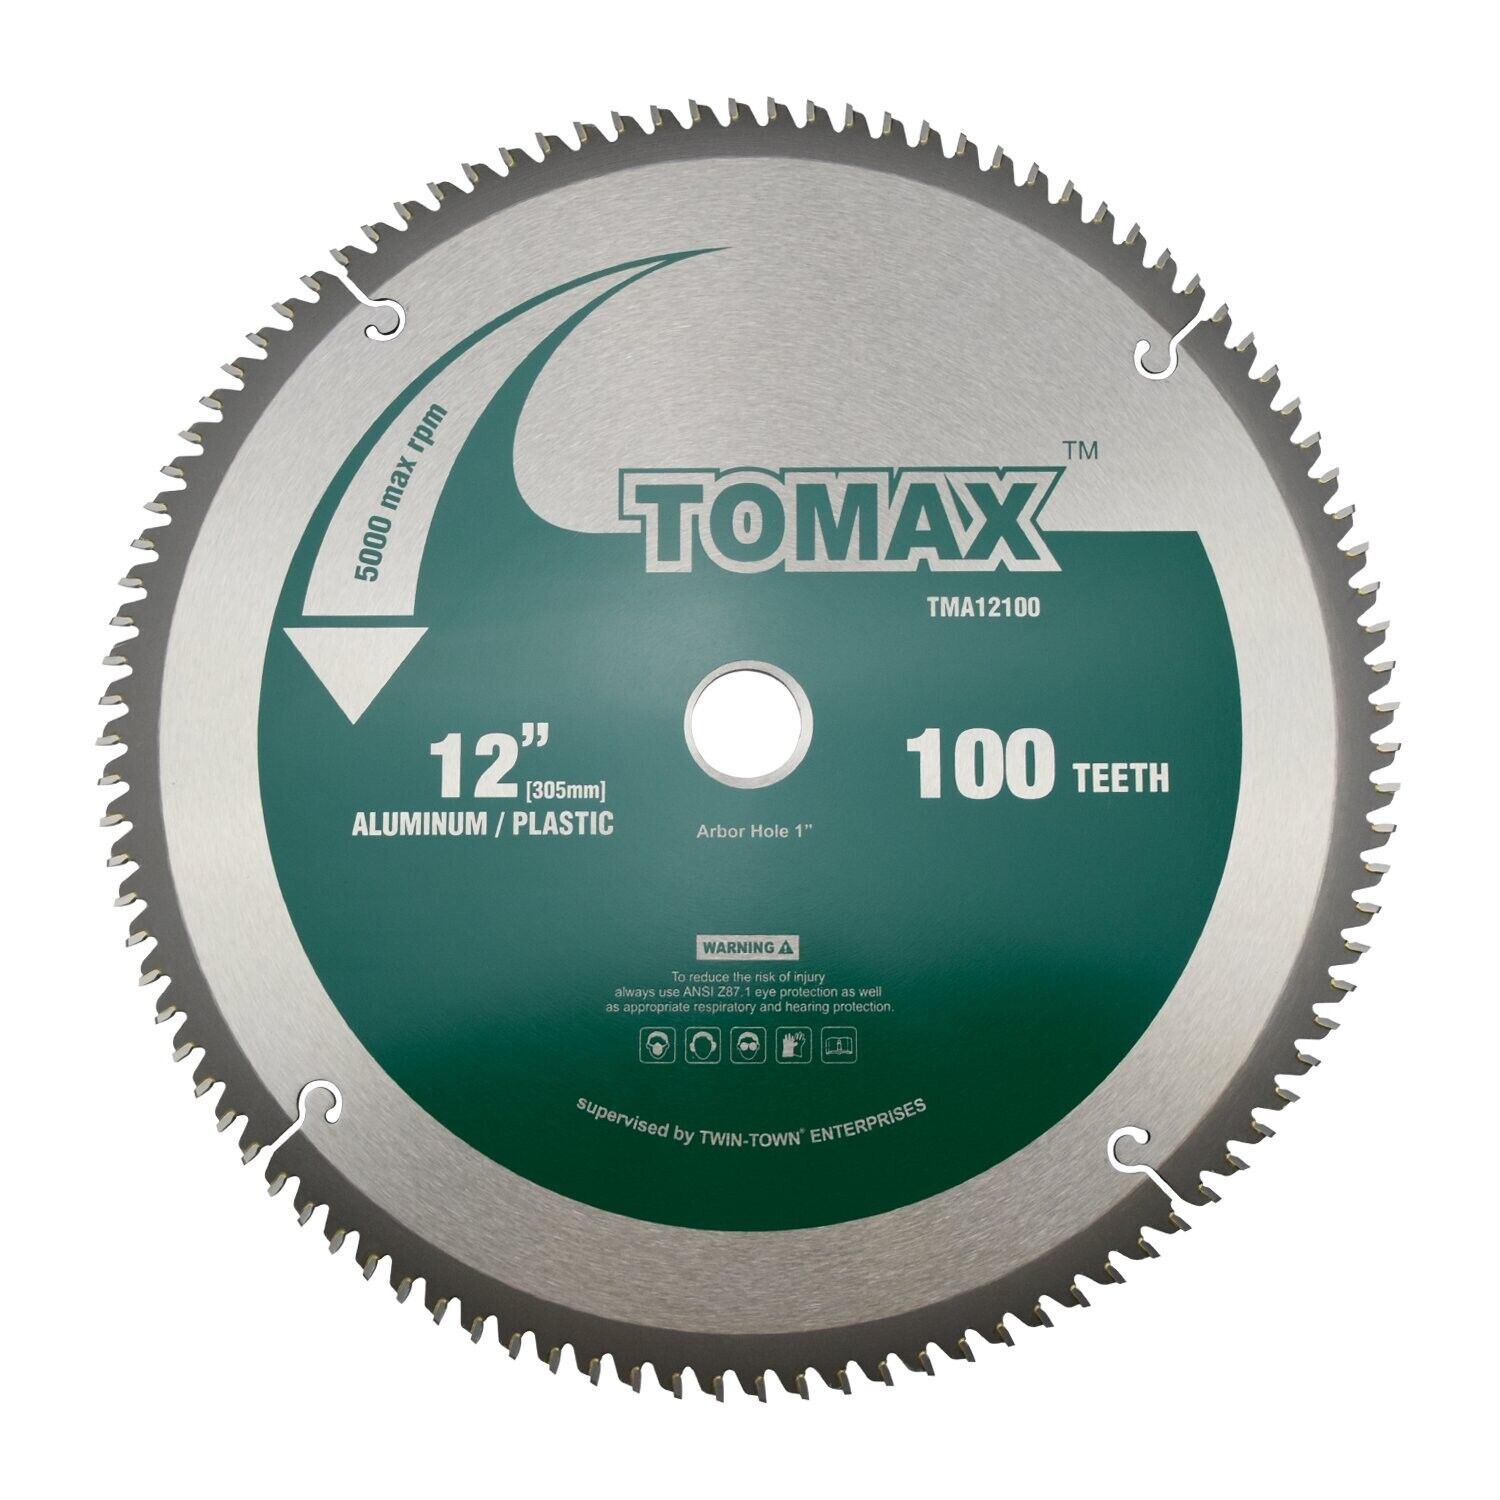 TOMAX 12-Inch 100 Tooth TCG Aluminum and Non-Ferrous Metal Saw Blade with 1-I...